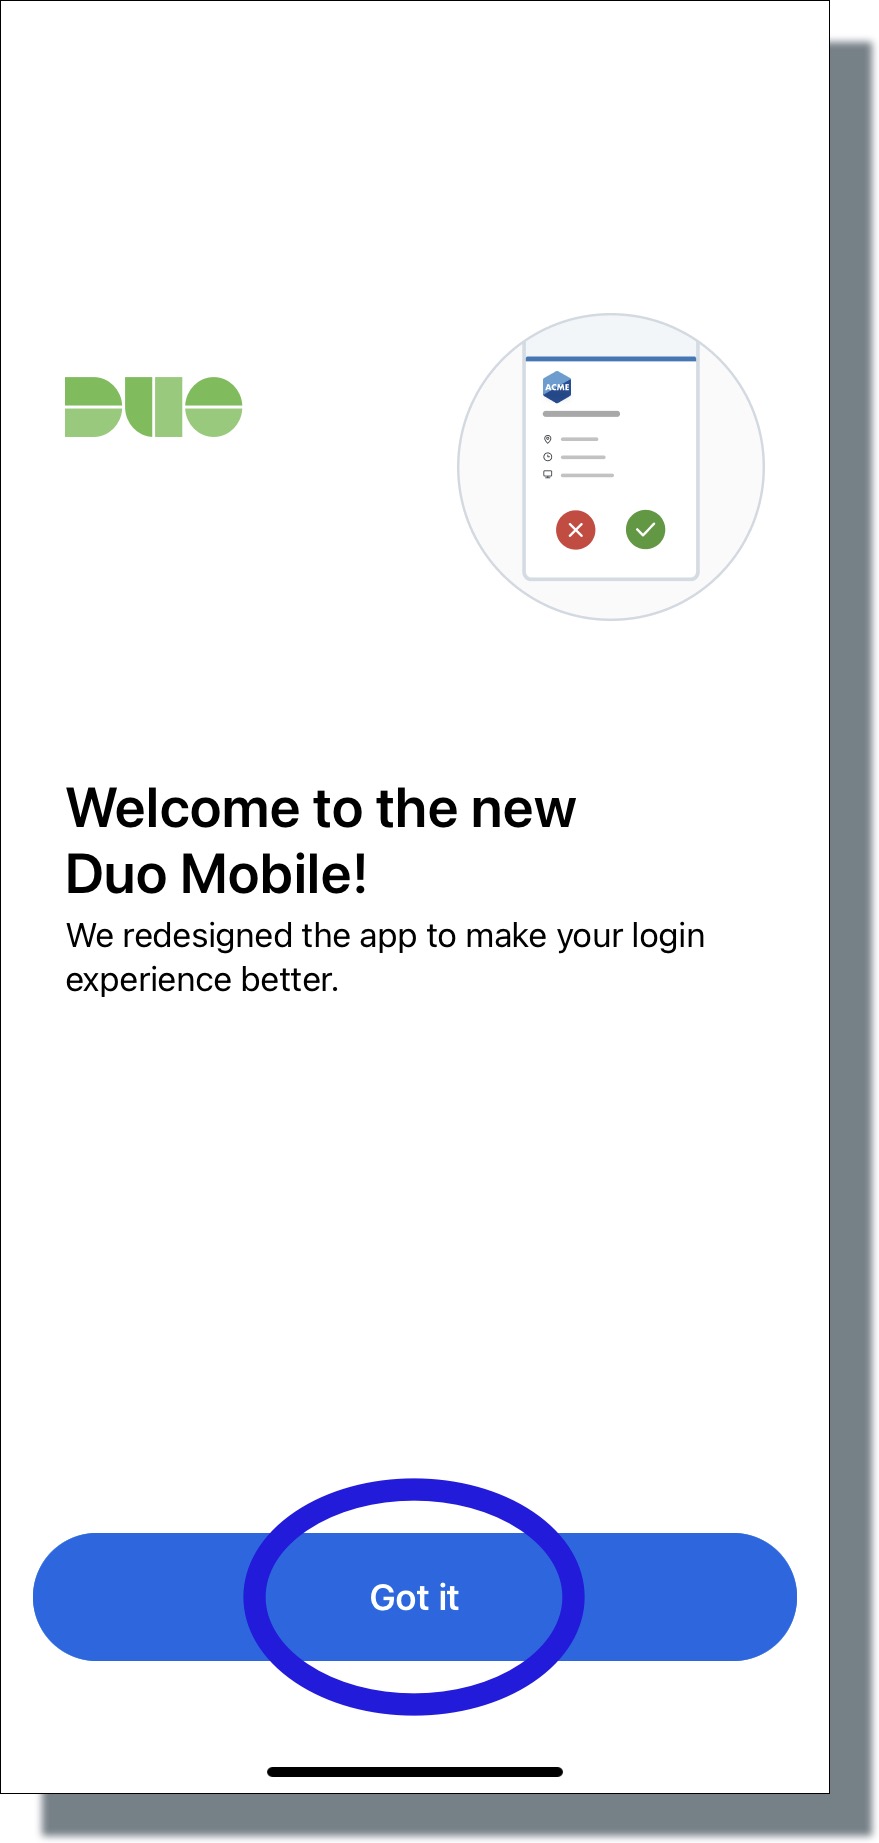 Tap 'Got it' in the Duo Mobile welcome screen.